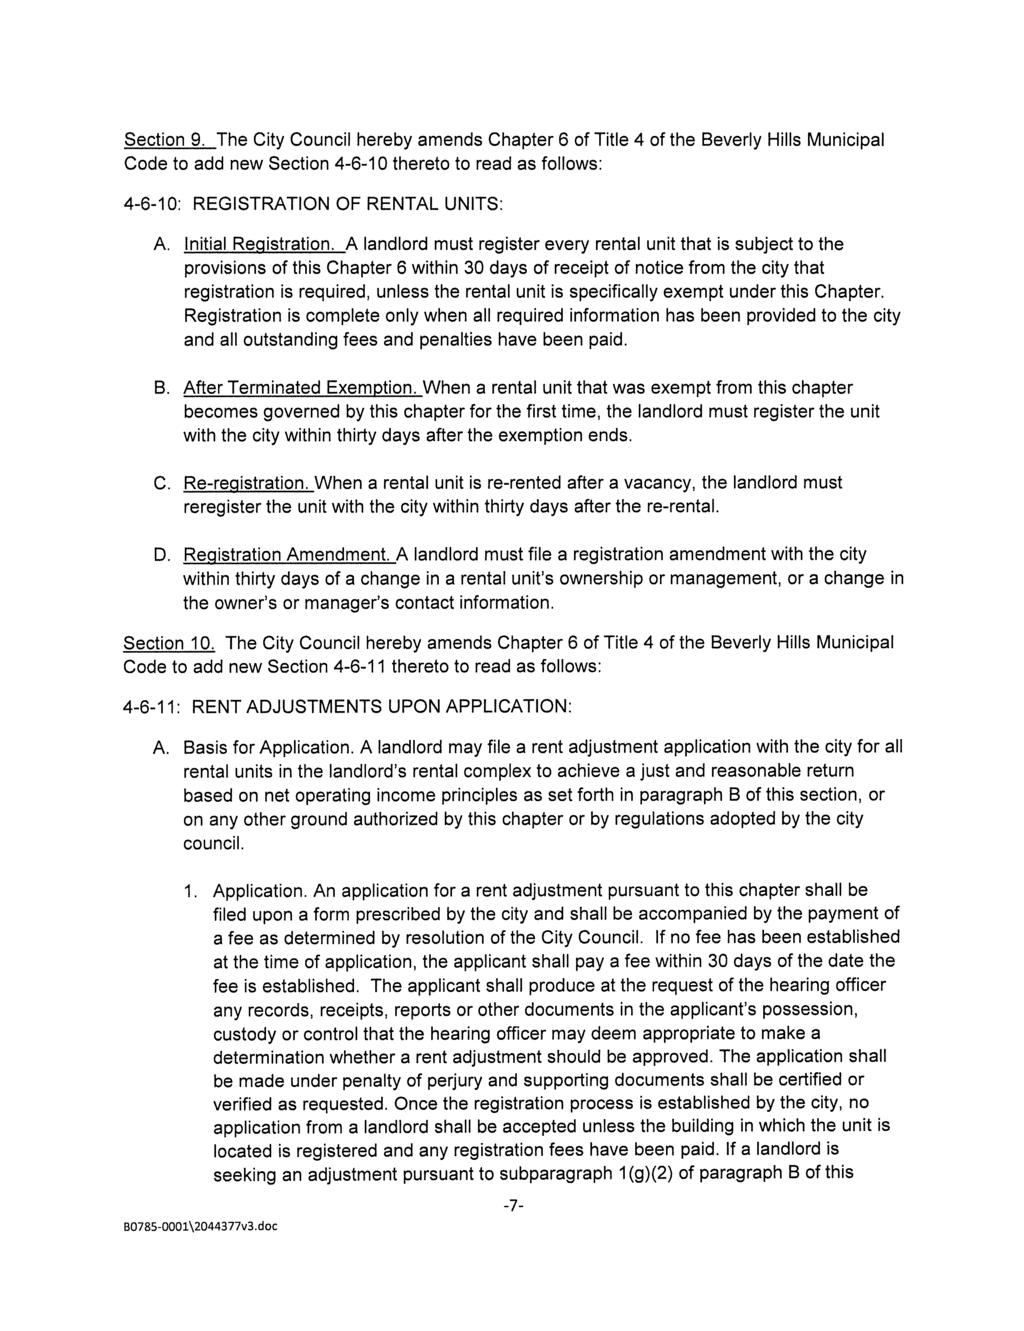 Section 9. The City Council hereby amends Chapter 6 of Title 4 of the Beverly Hills Municipal Code to add new Section 4-6-10 thereto to read as follows: 4-6-10: REGISTRATION OF RENTAL UNITS: A.